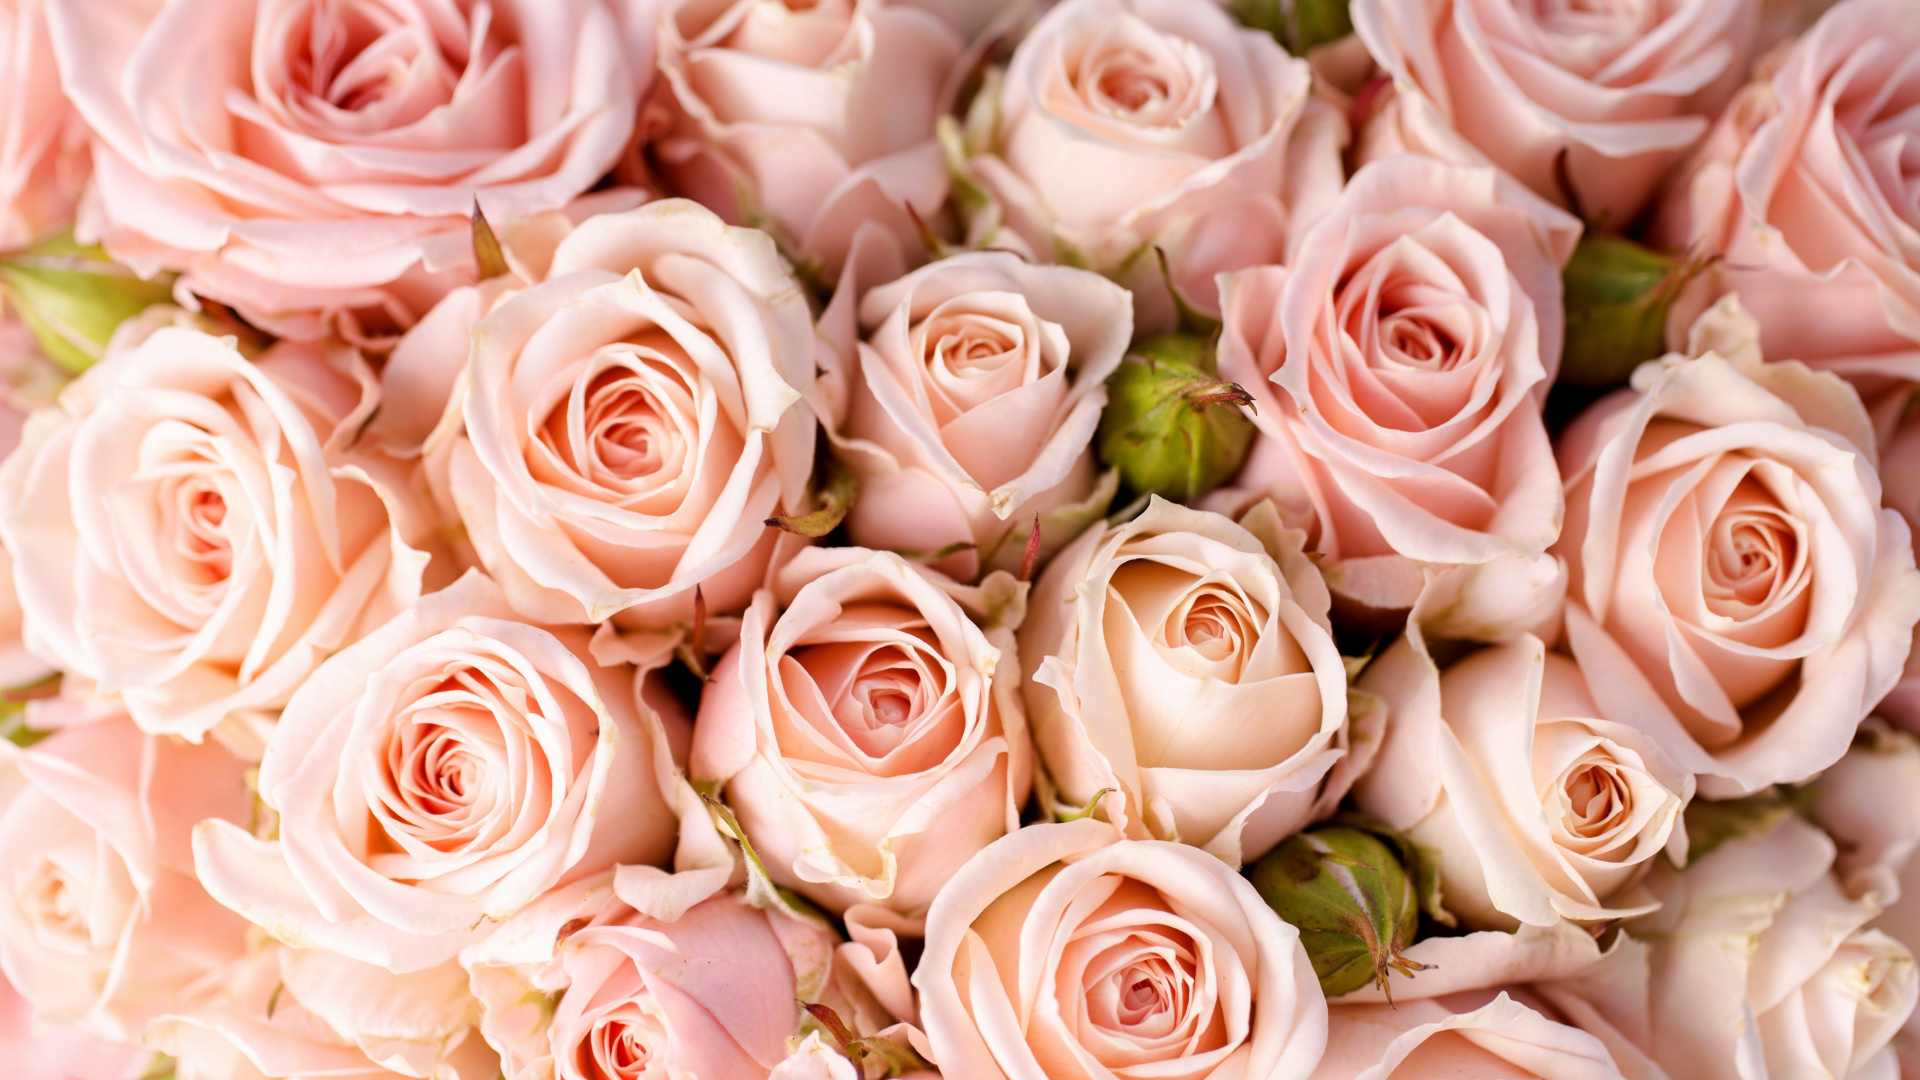 Pink Roses in Close up Photography. Wallpaper in 1920x1080 Resolution